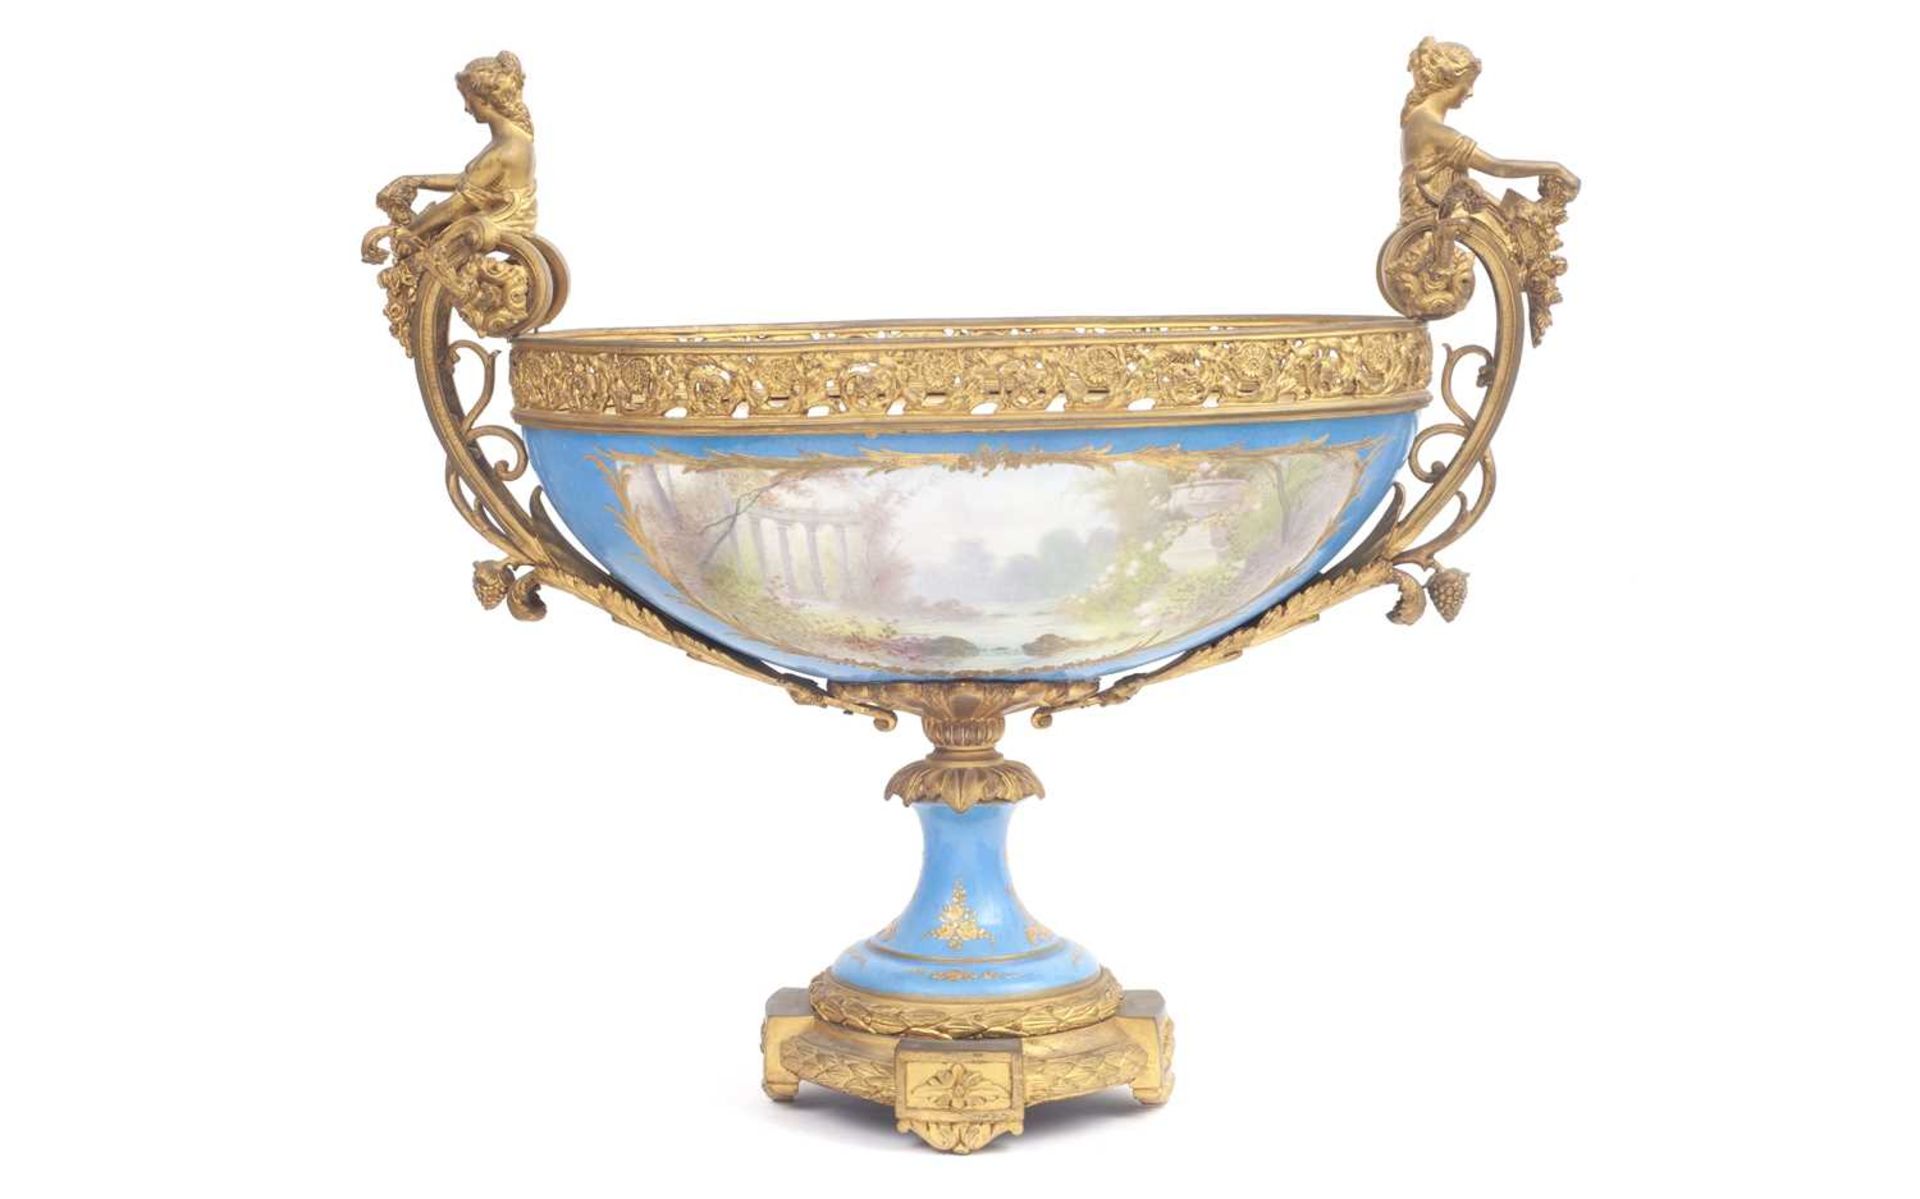 A VERY LARGE LATE 19TH CENTURY FRENCH SEVRES STYLE PORCELAIN AND ORMOLU MOUNTED JARDINIERE - Image 2 of 4